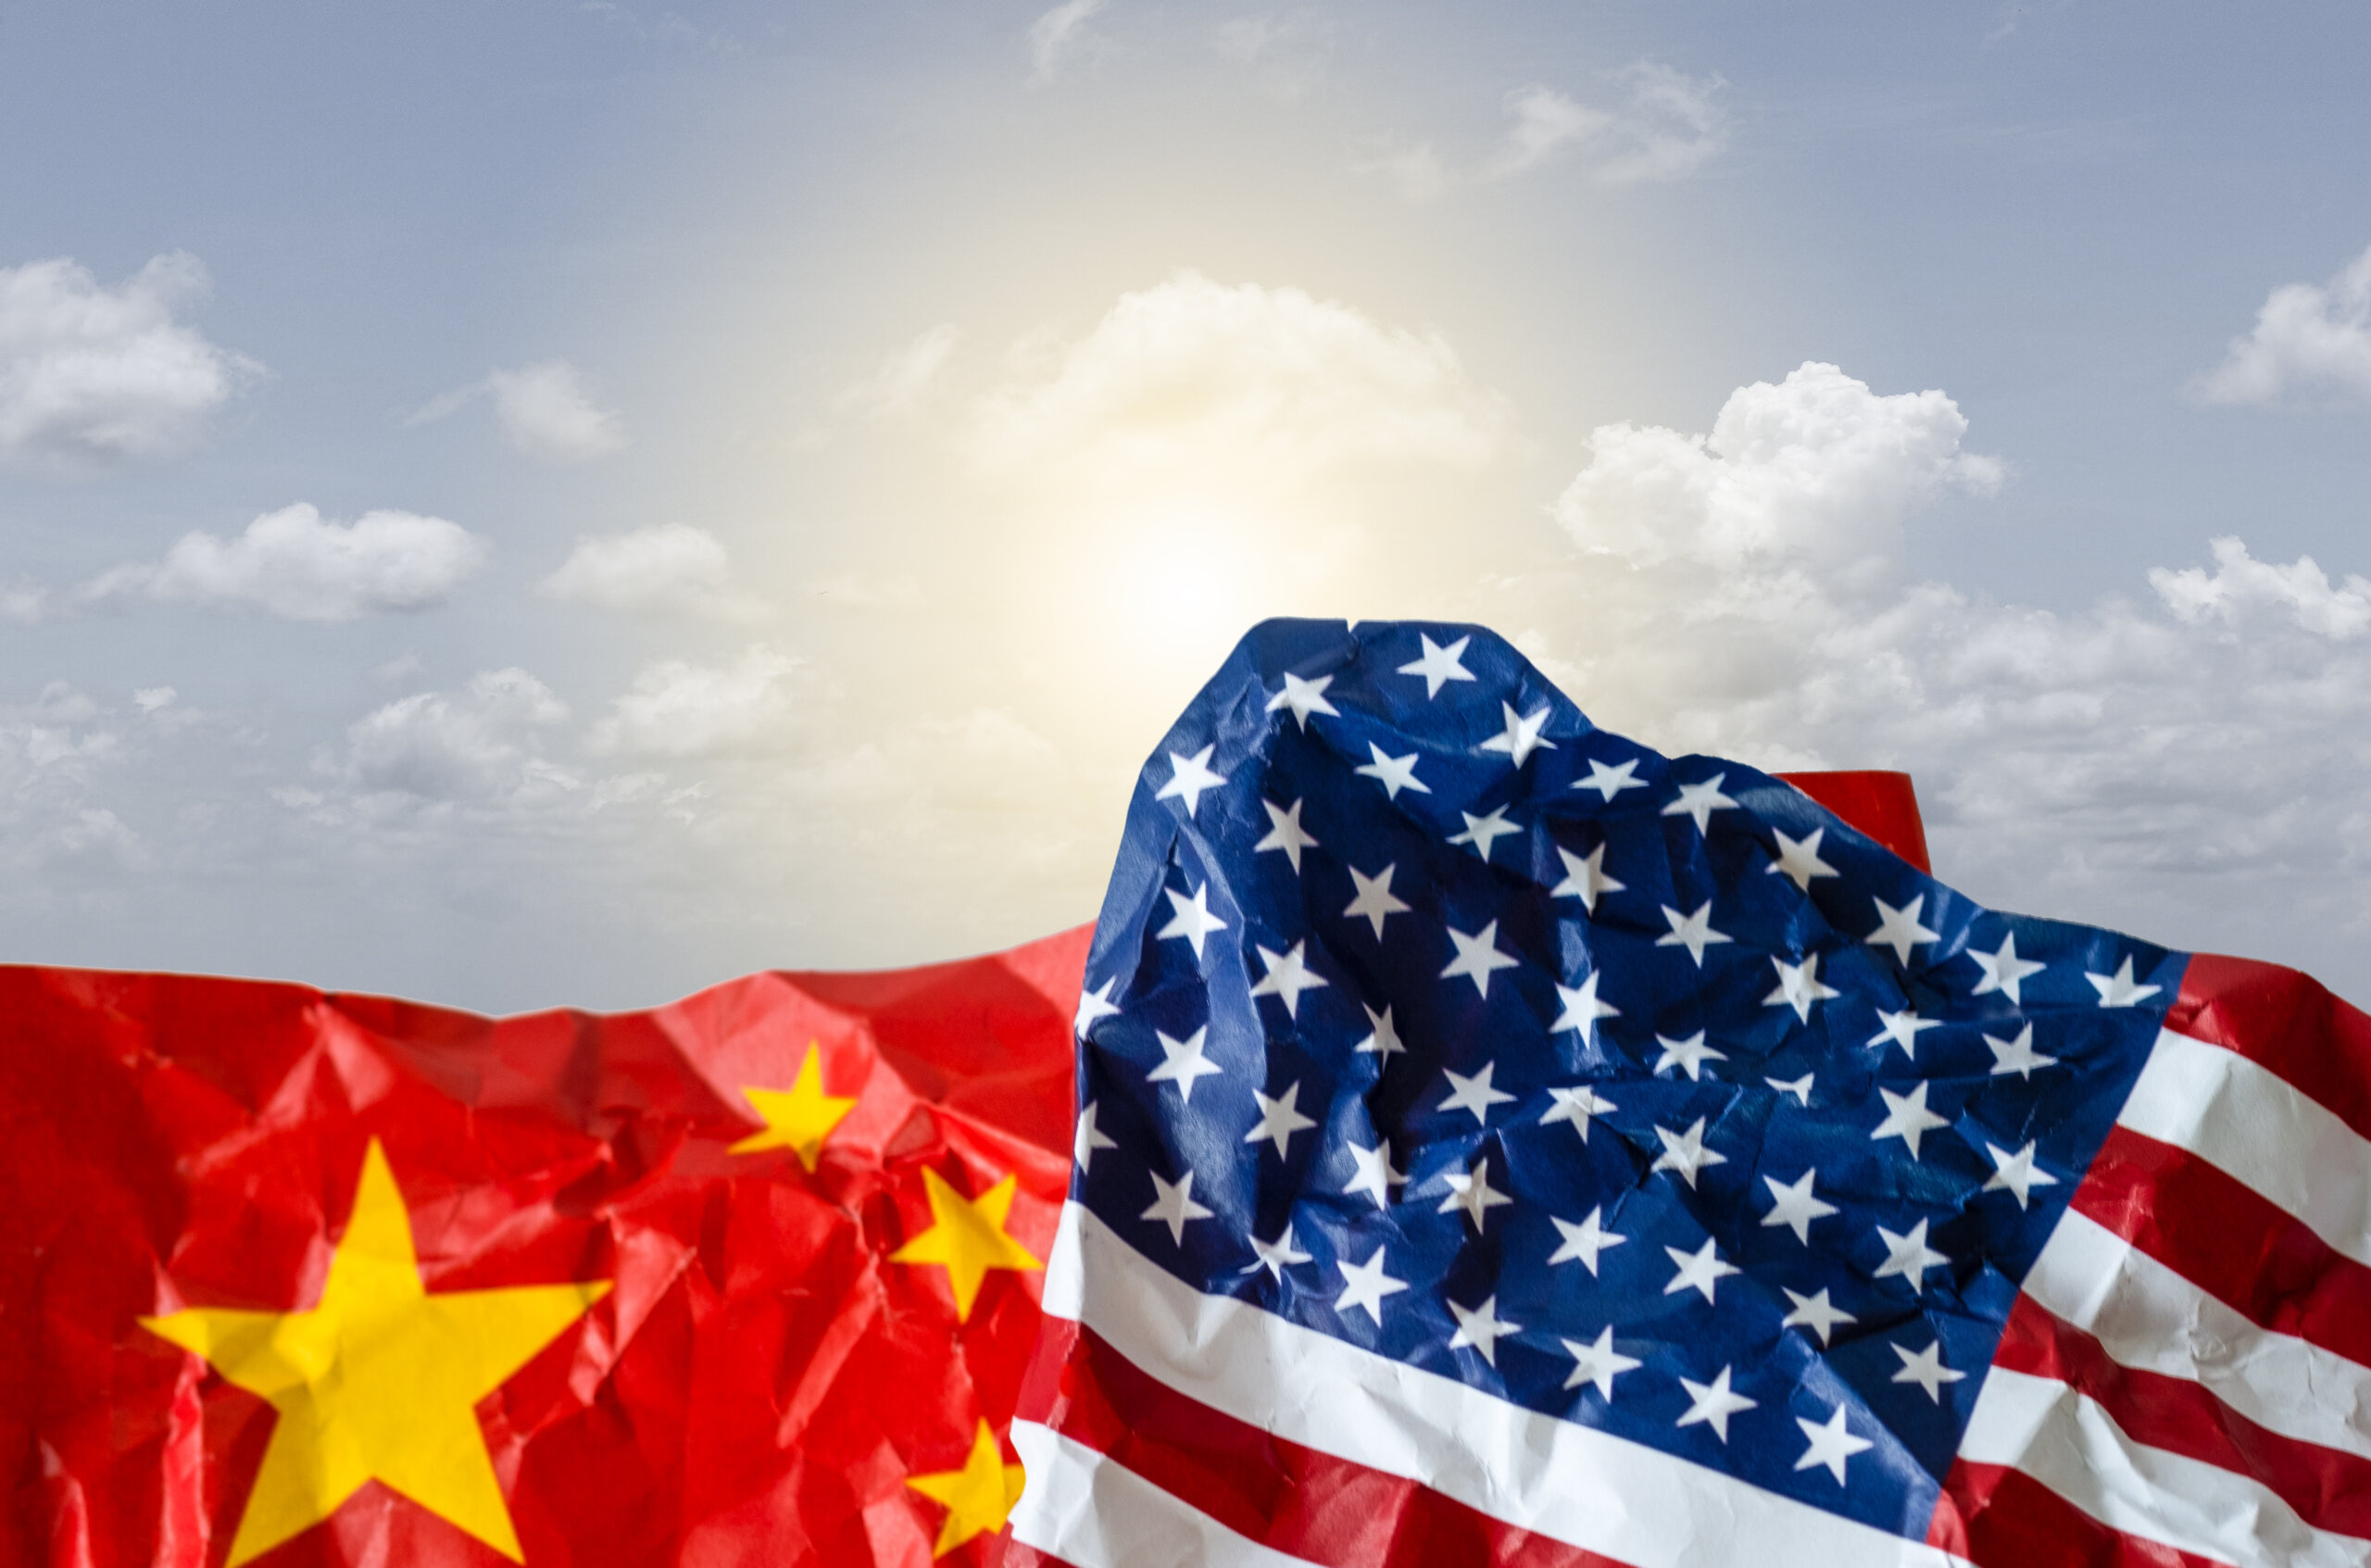 US-China: tightening the screws with export controls while granting leeway to some. Source: Shutterstock